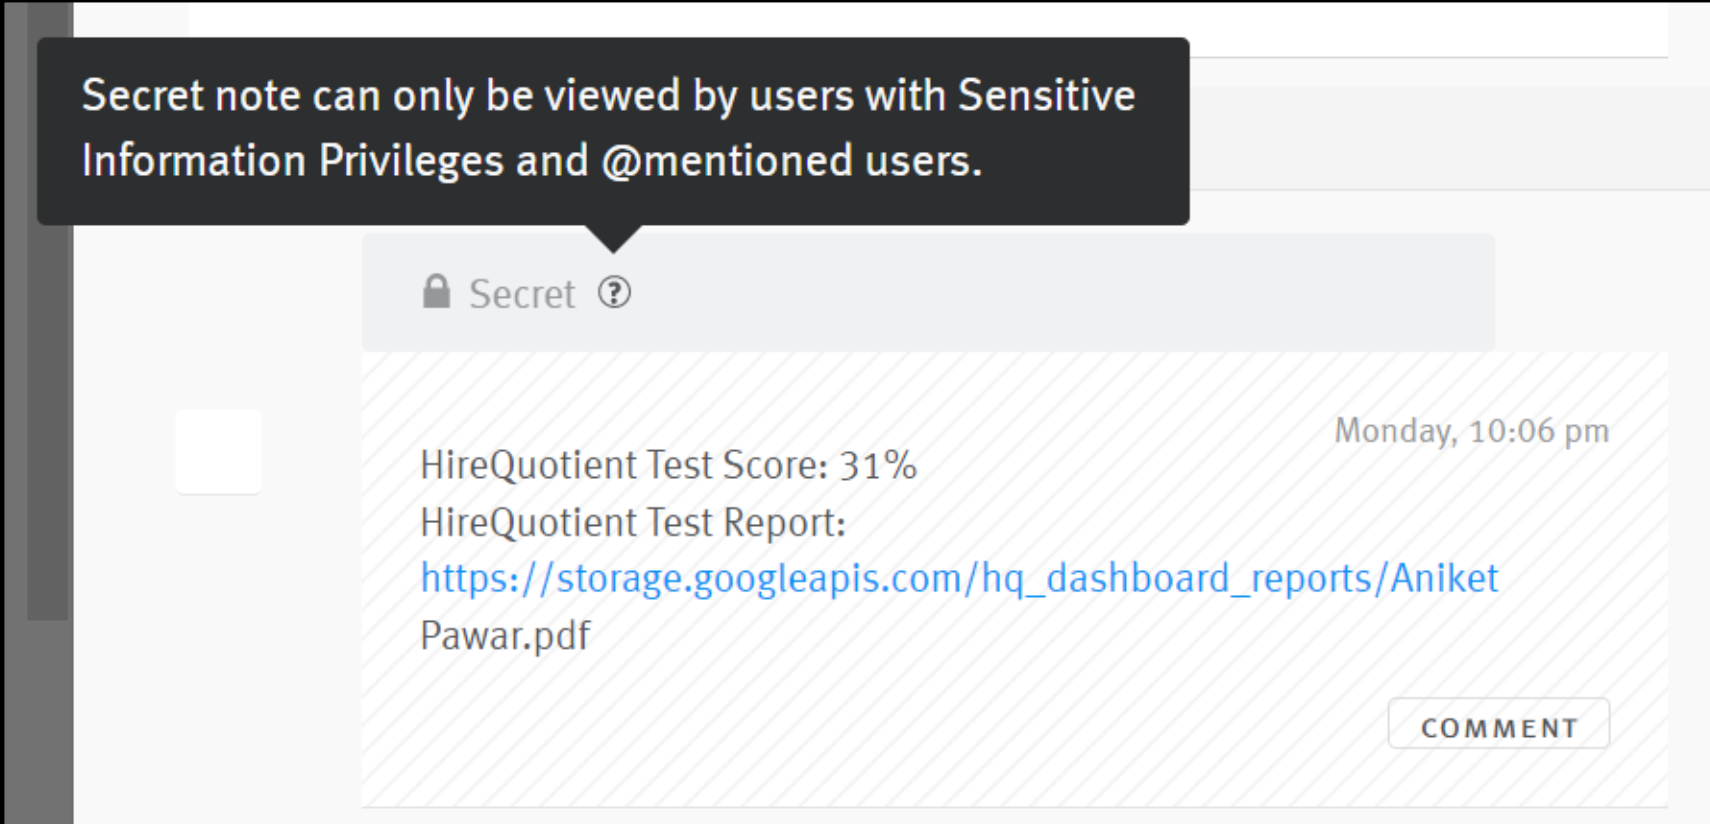 HireQuotient test score and link to report in secret note on candidate profile in Lever.